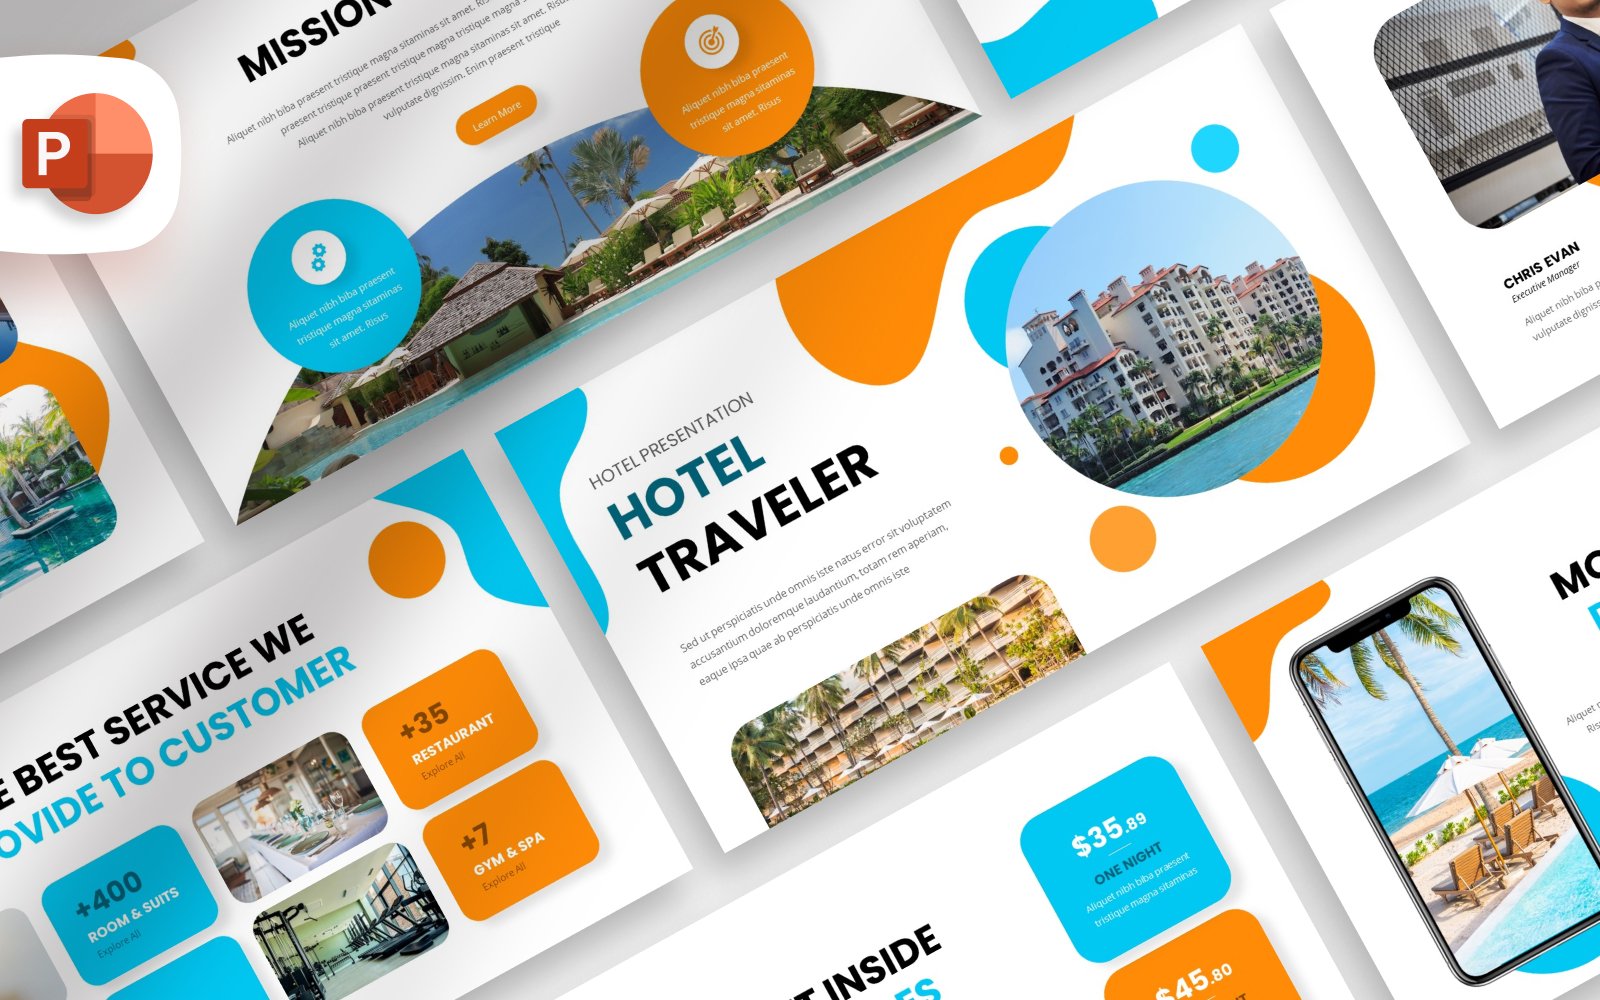 Template #369117 Room Travel Webdesign Template - Logo template Preview